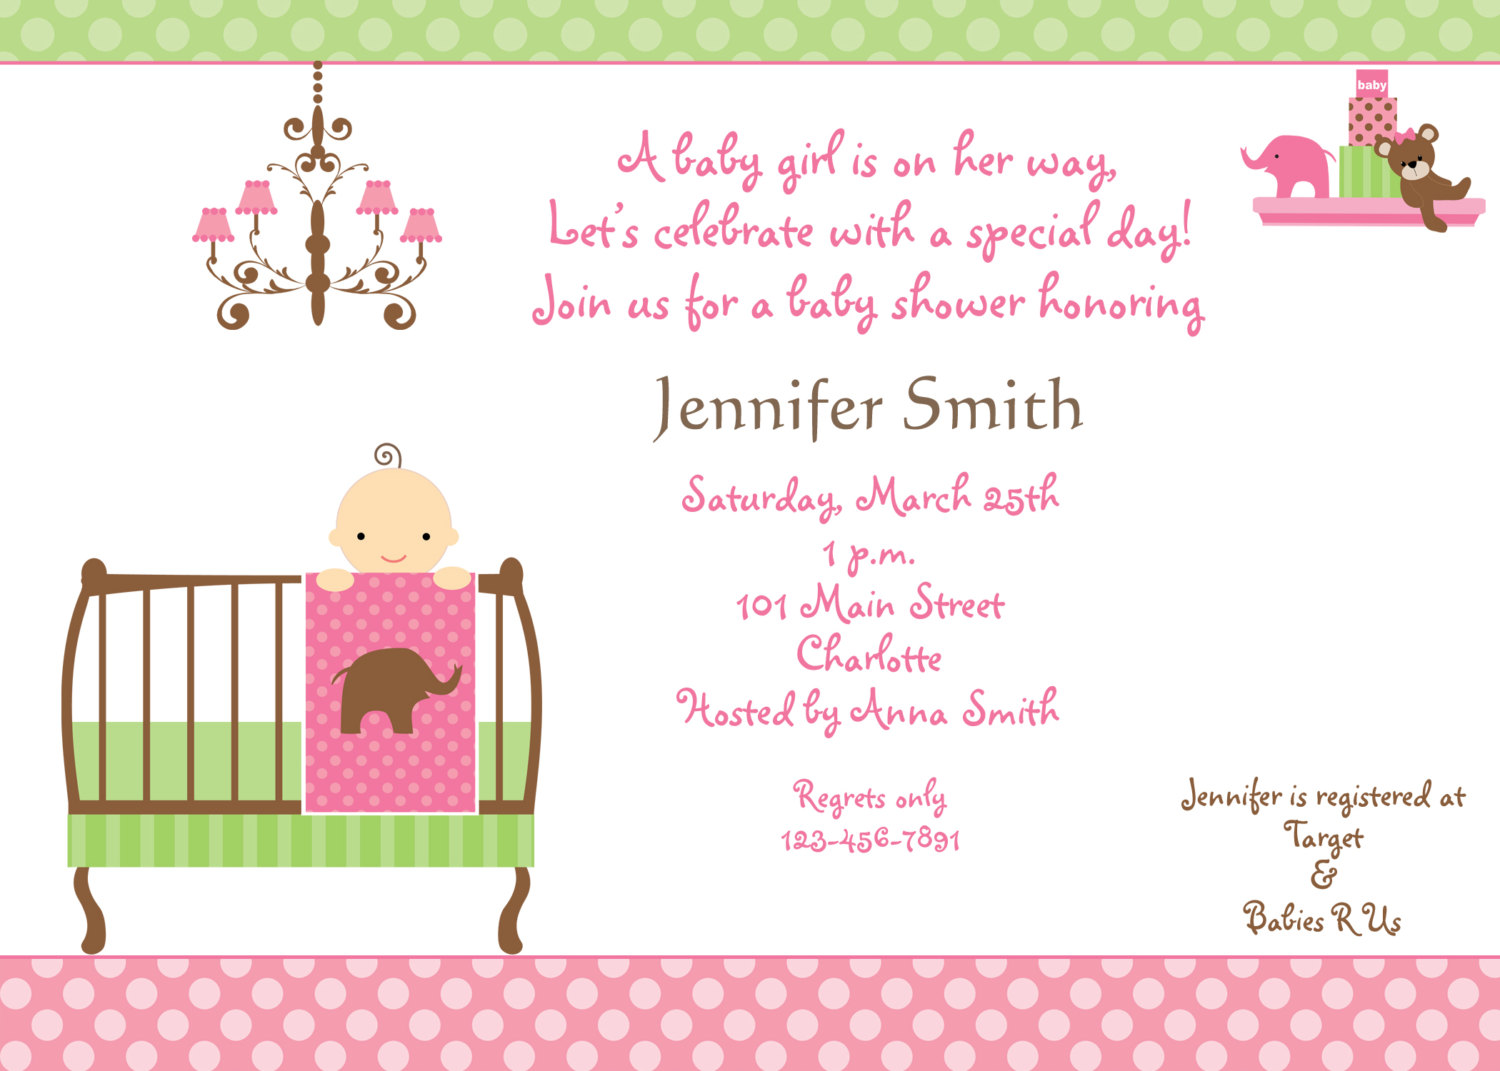 Full Size of Baby Shower:63+ Delightful Cheap Baby Shower Invitations Image Inspirations Cheap Baby Shower Invitations Personalized Baby Shower Baby Shower Ideas For Boys Baby Shower Boy Baby Shower Wreath Comida Para Baby Shower Baby Shower Invitations Extraordinary Baby Shower Invitations To Make Baby Shower Invites Hi